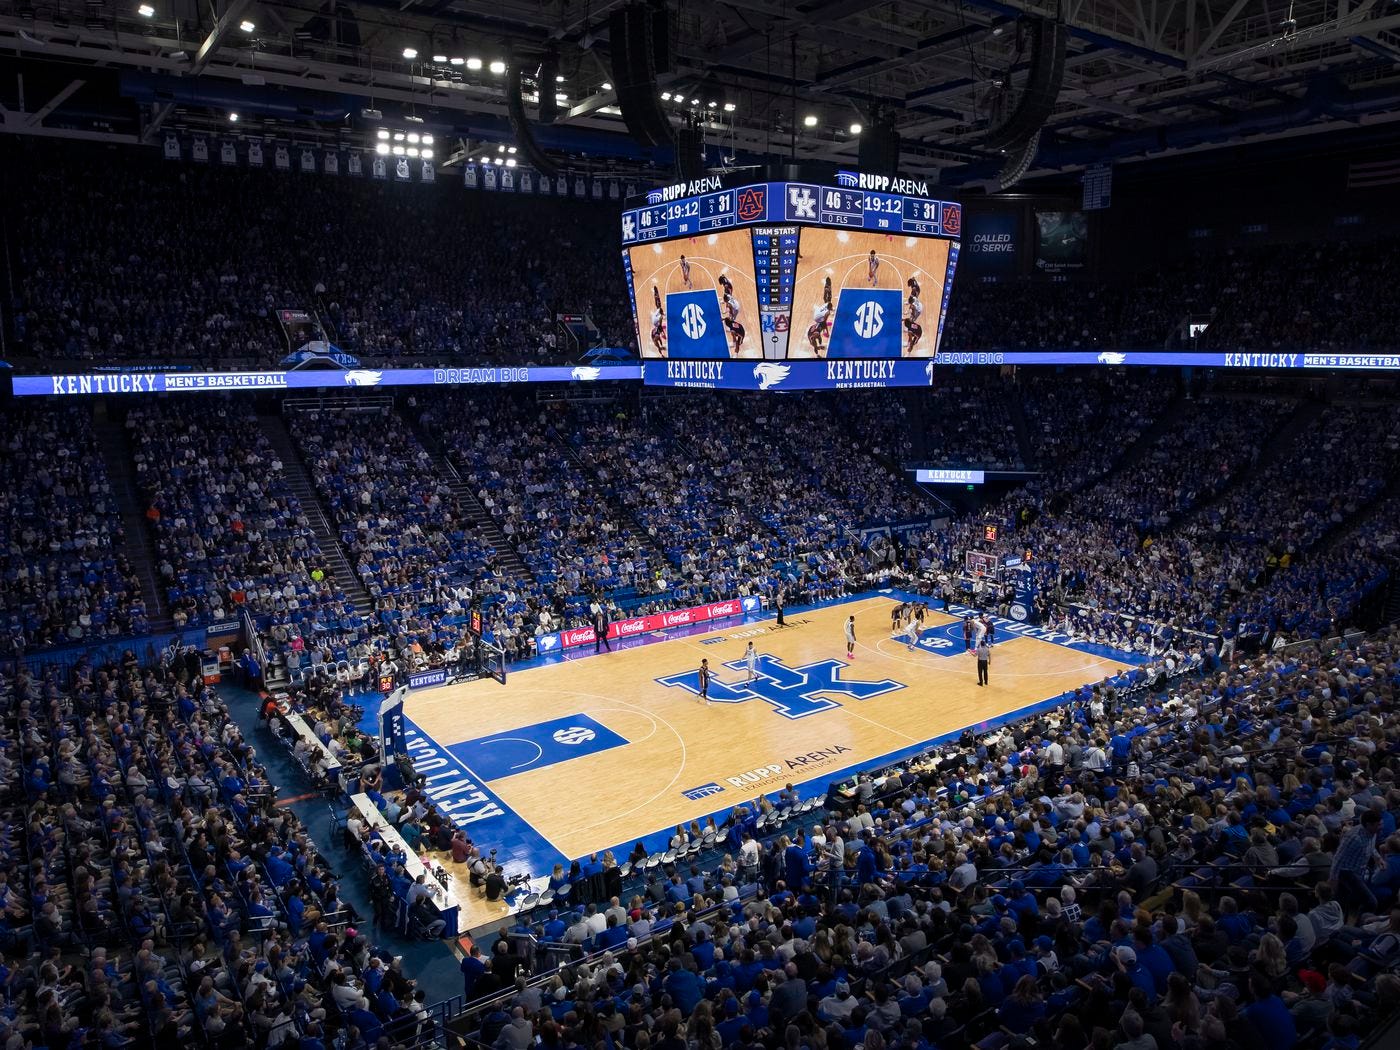 Rupp Arena gets a name change - A Sea Of Blue